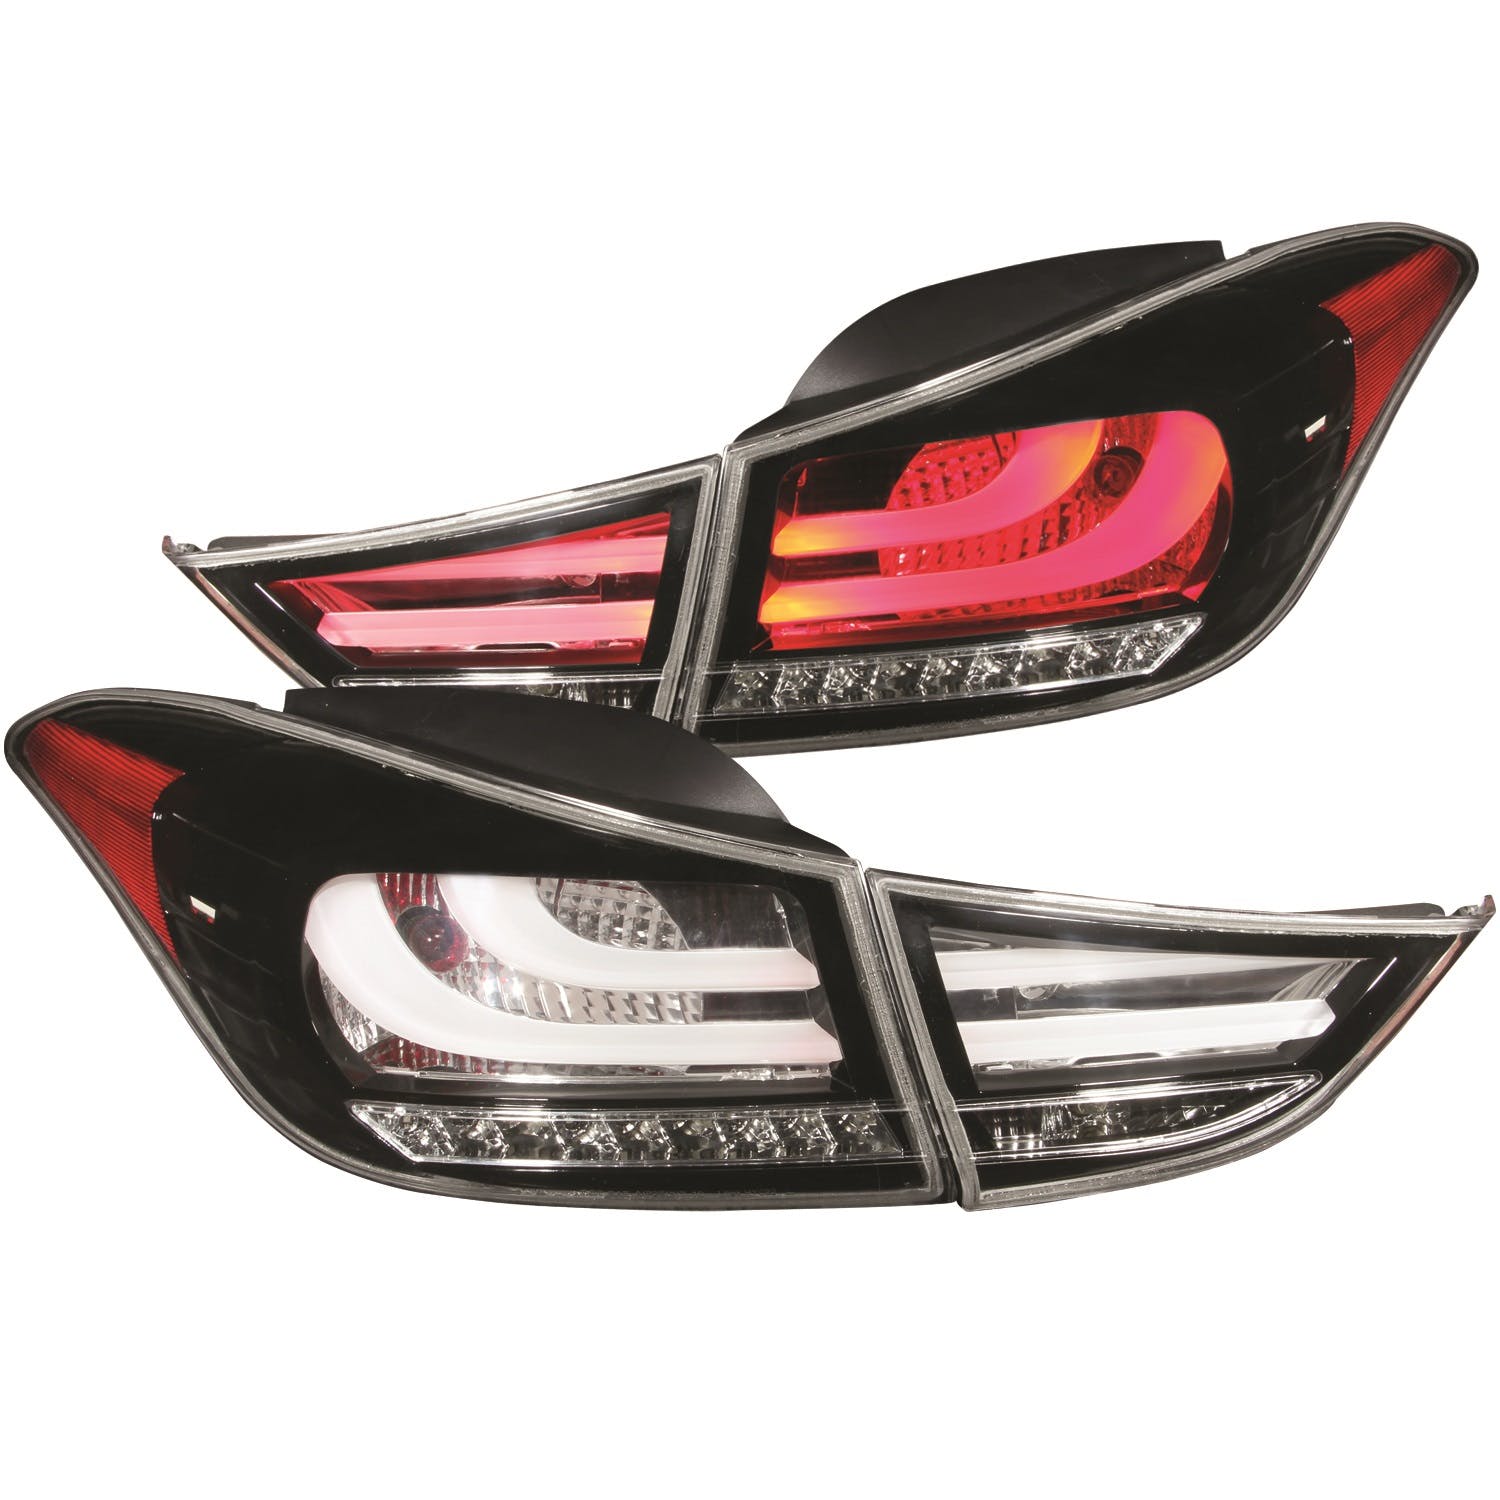 AnzoUSA 321298 LED Taillights Black 4pc